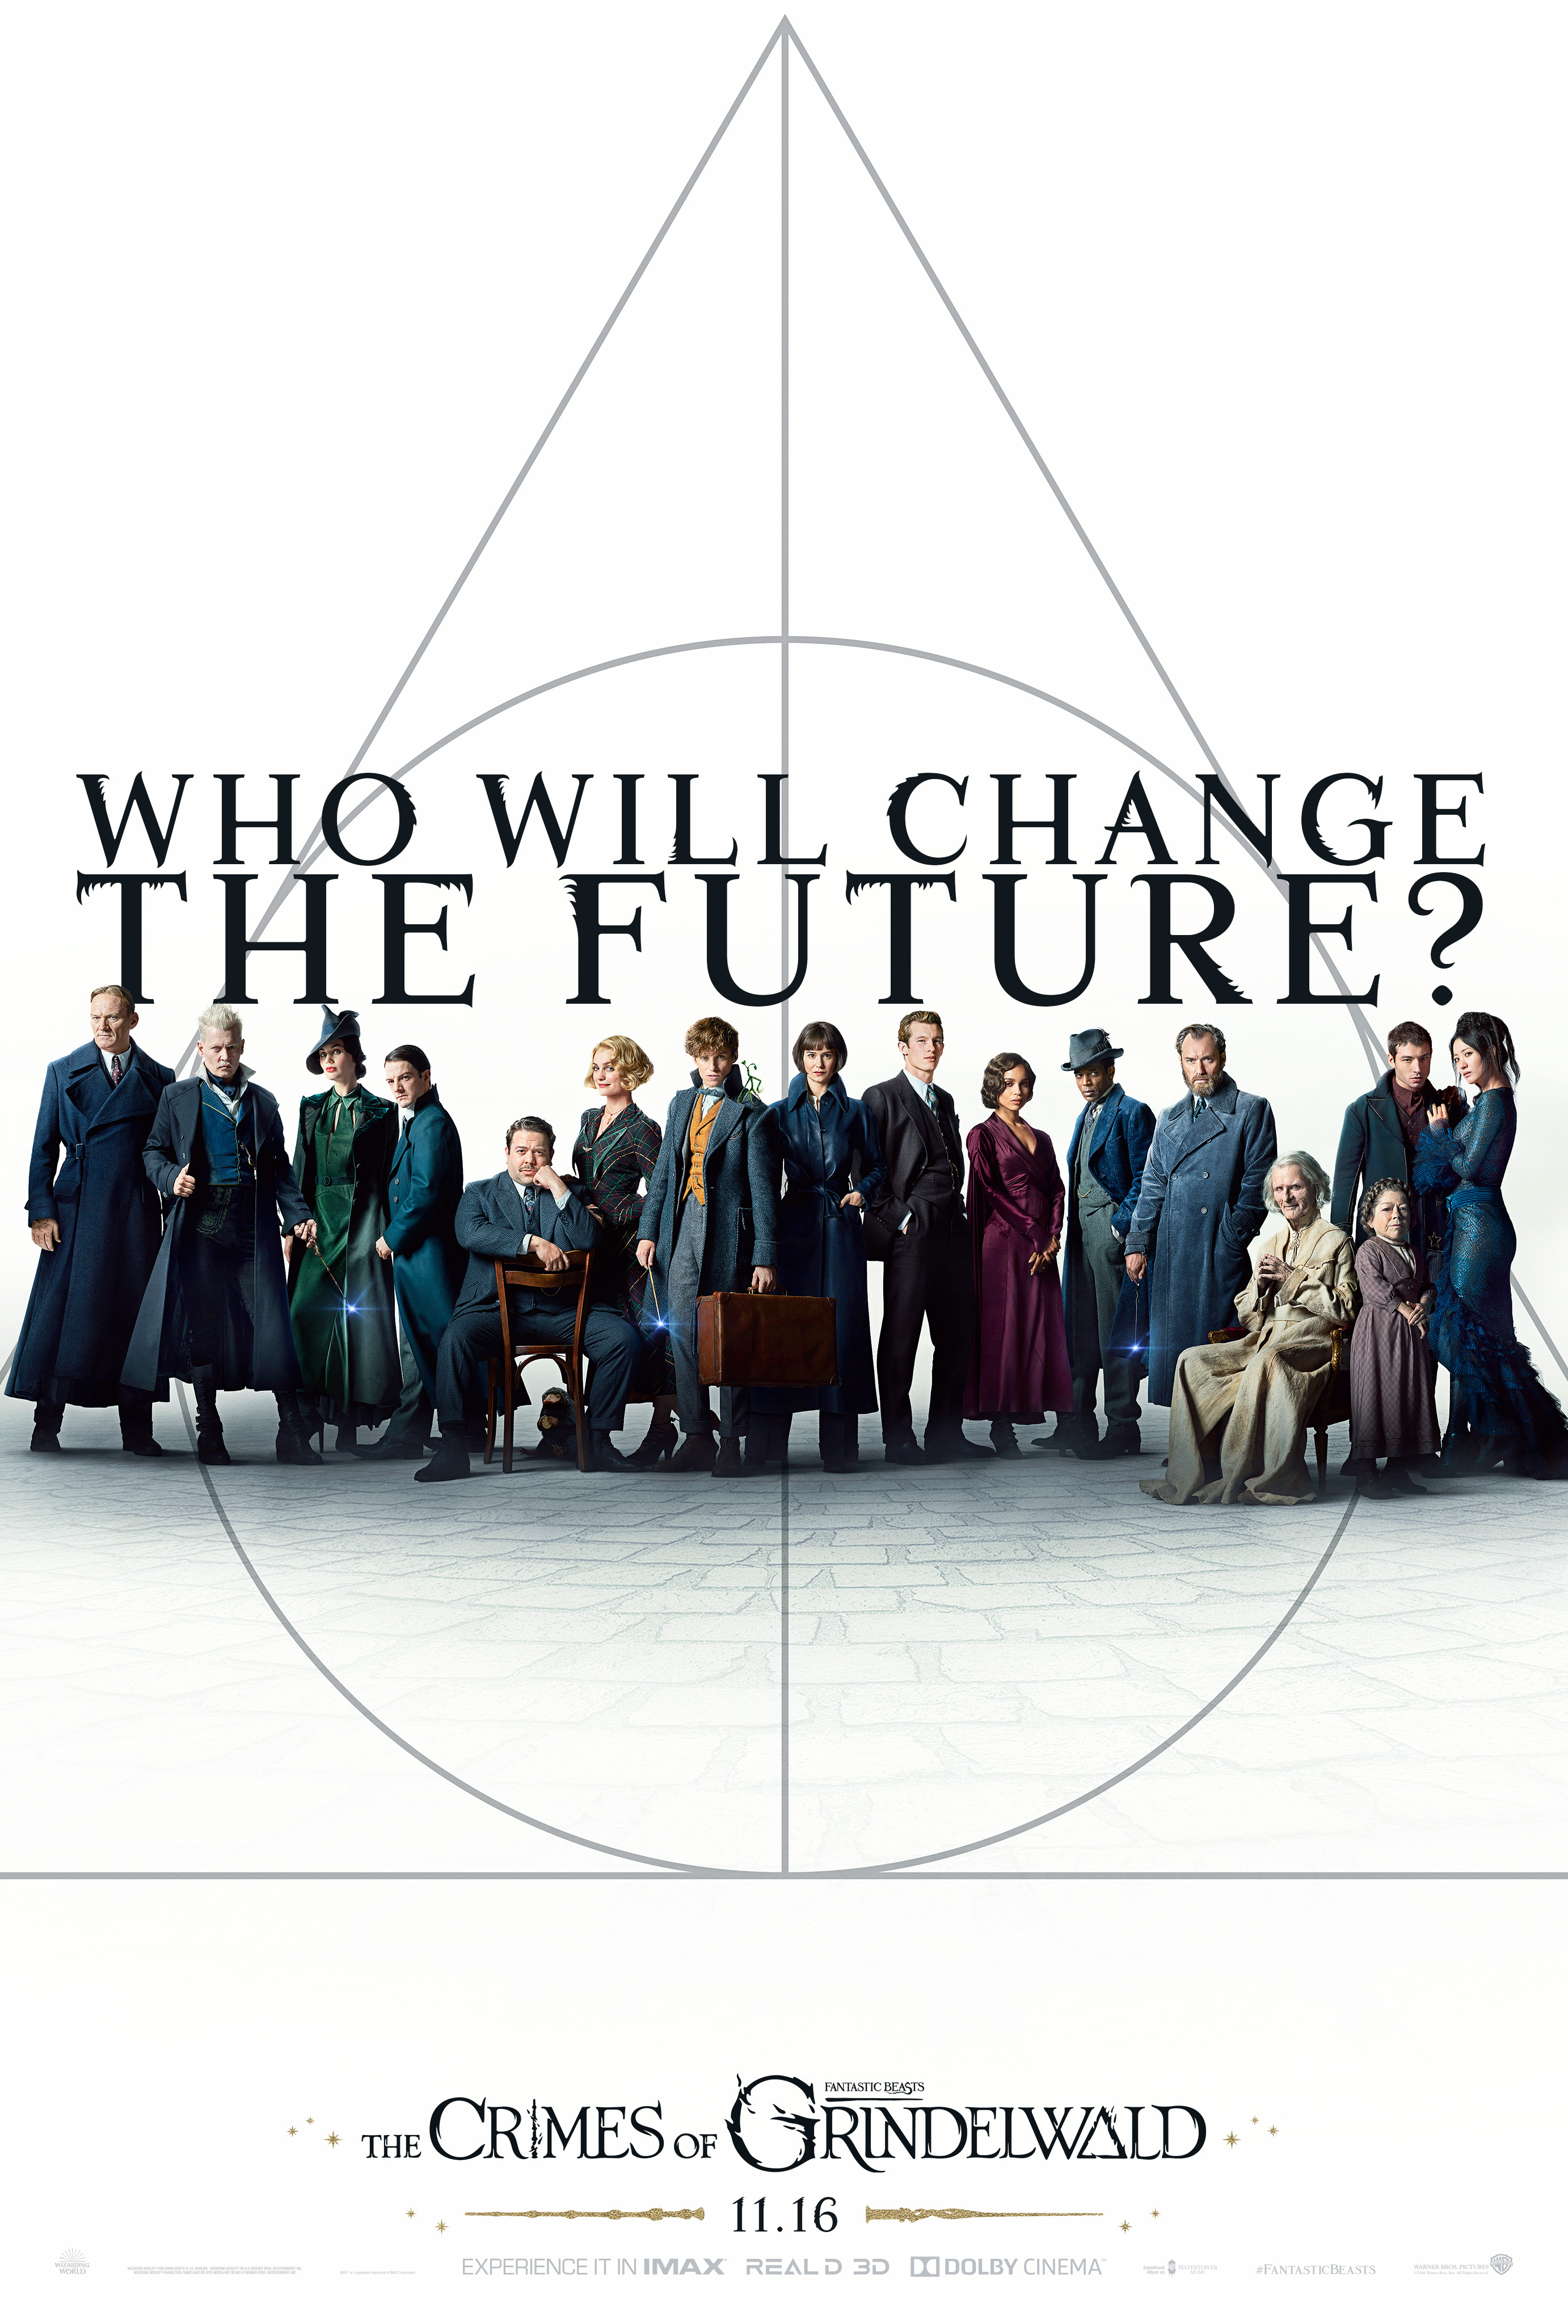 Brand New Images And Artwork For Fantastic Beasts - Crimes Of Grindelwald Poster , HD Wallpaper & Backgrounds